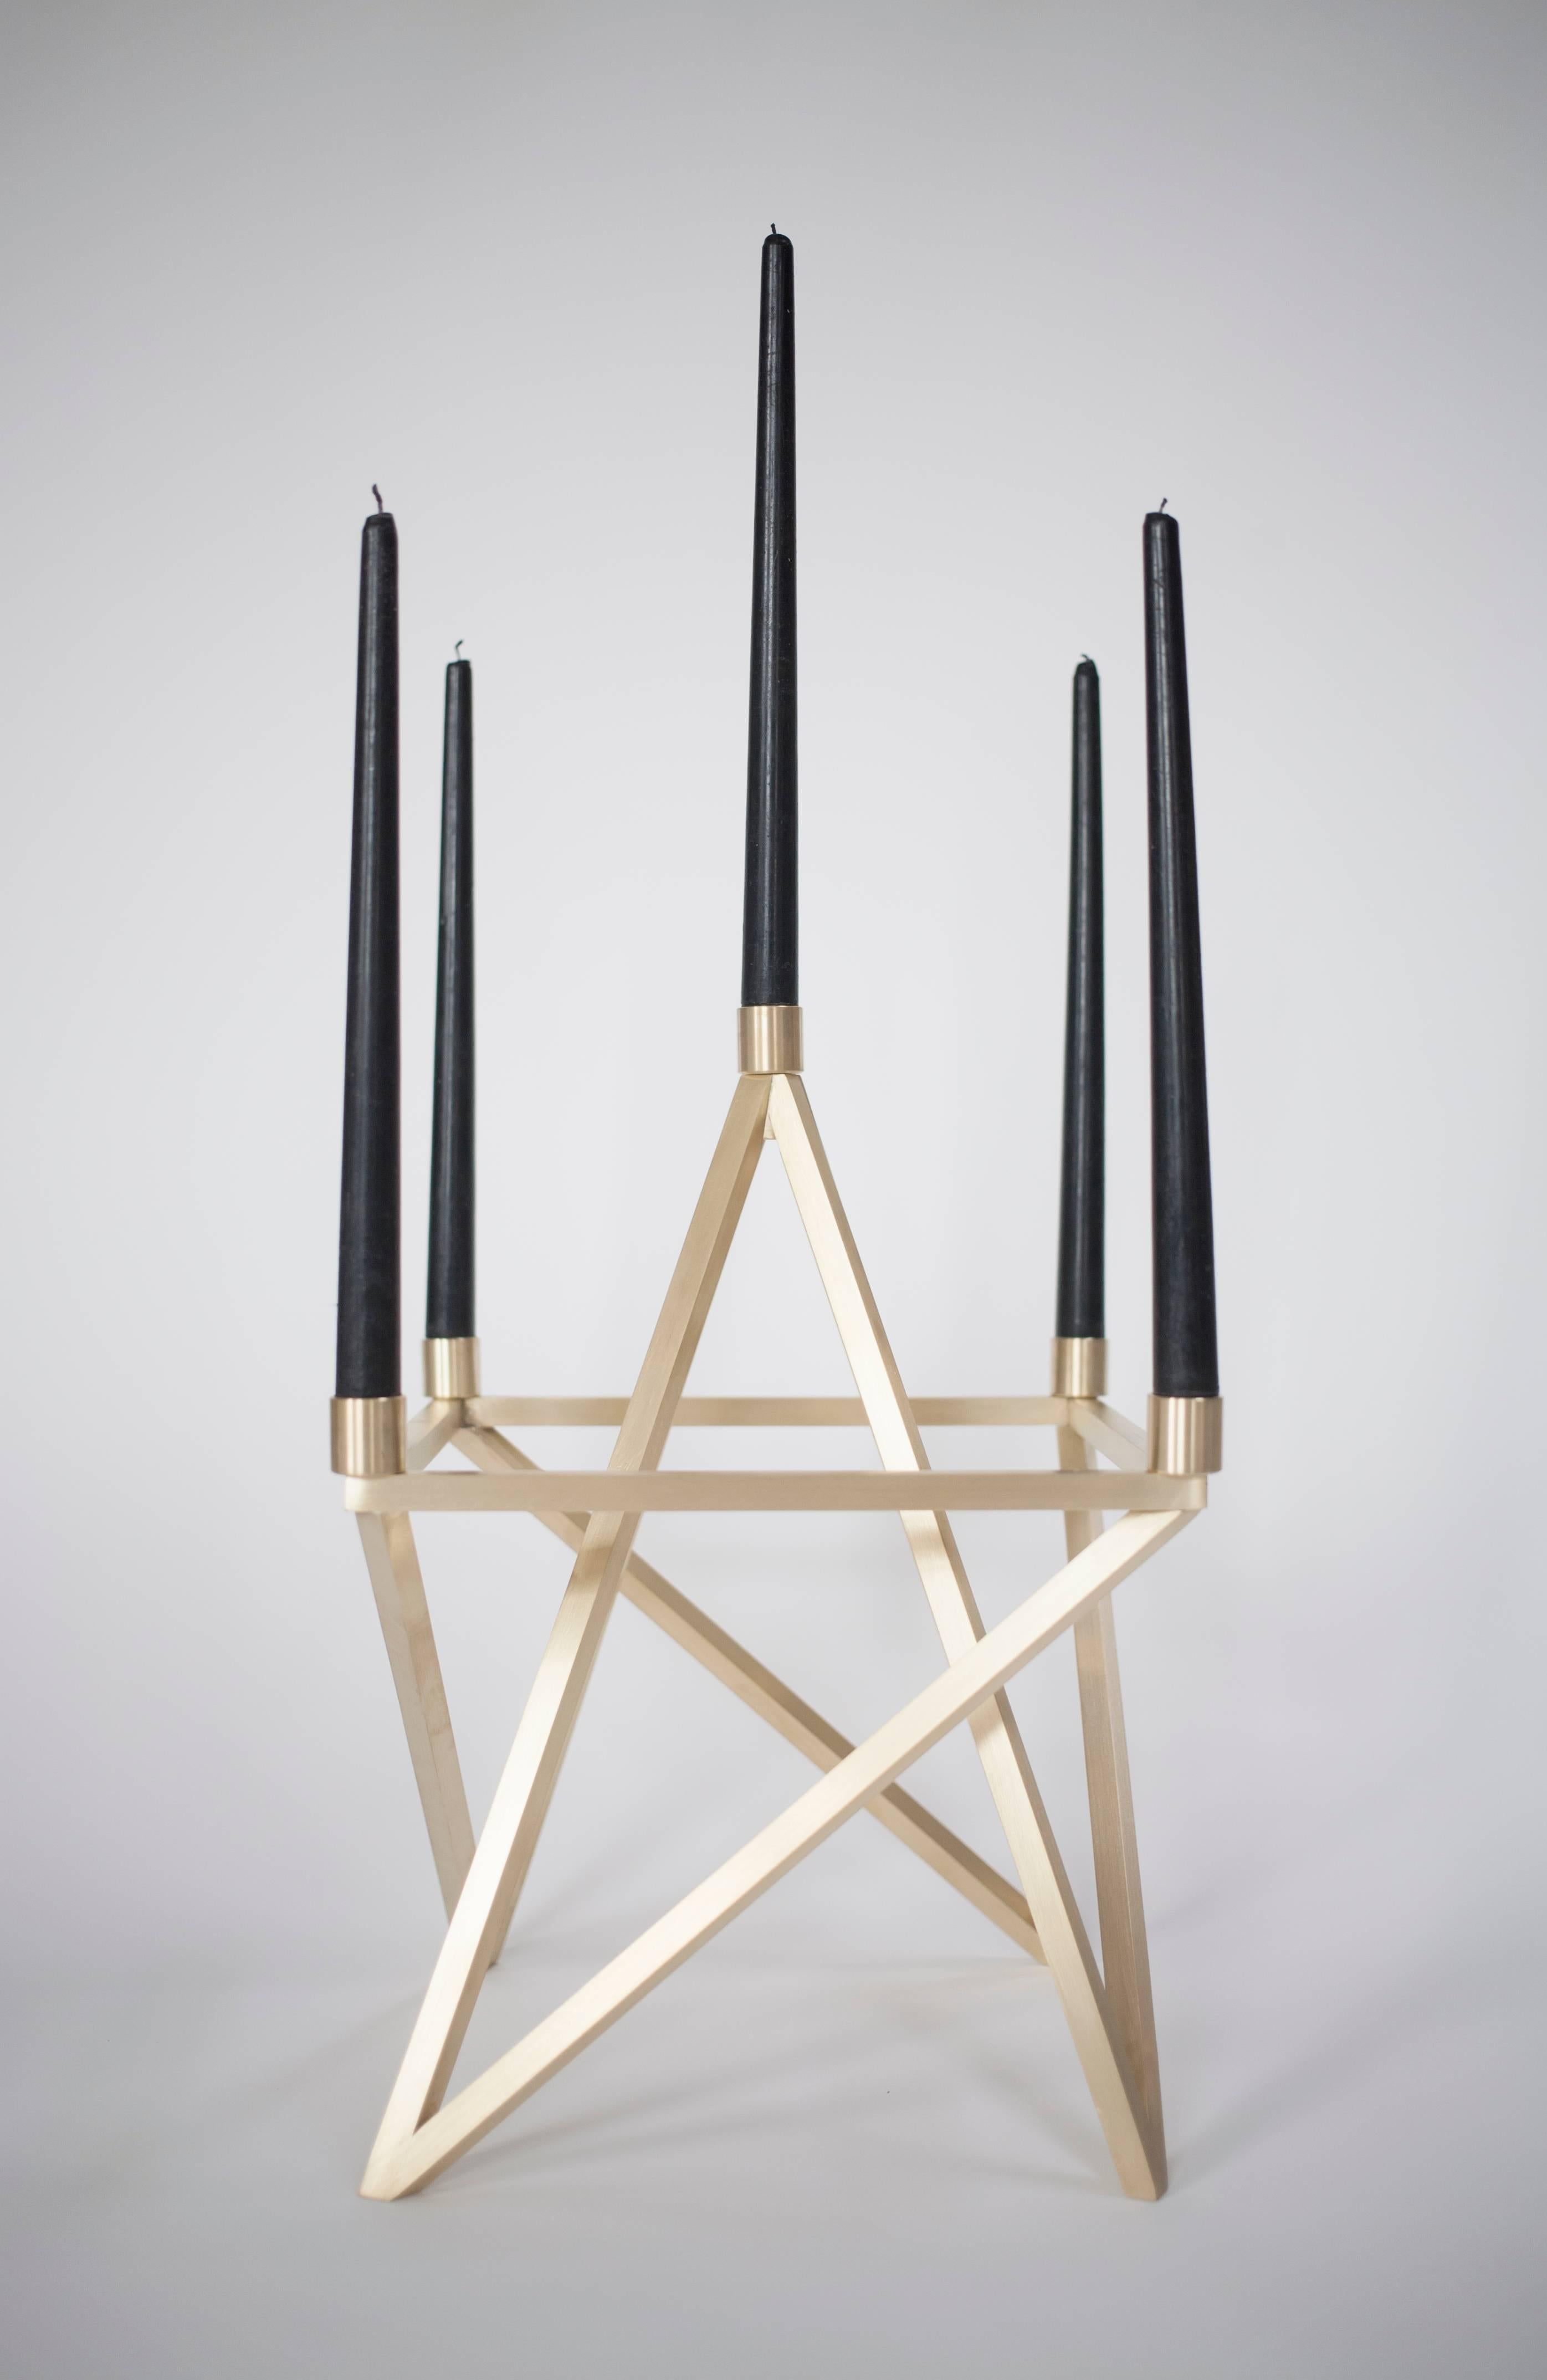 Contemporary 'Pagan' Star Candelabra by Material Lust, 2016 In New Condition For Sale In Los Angeles, CA